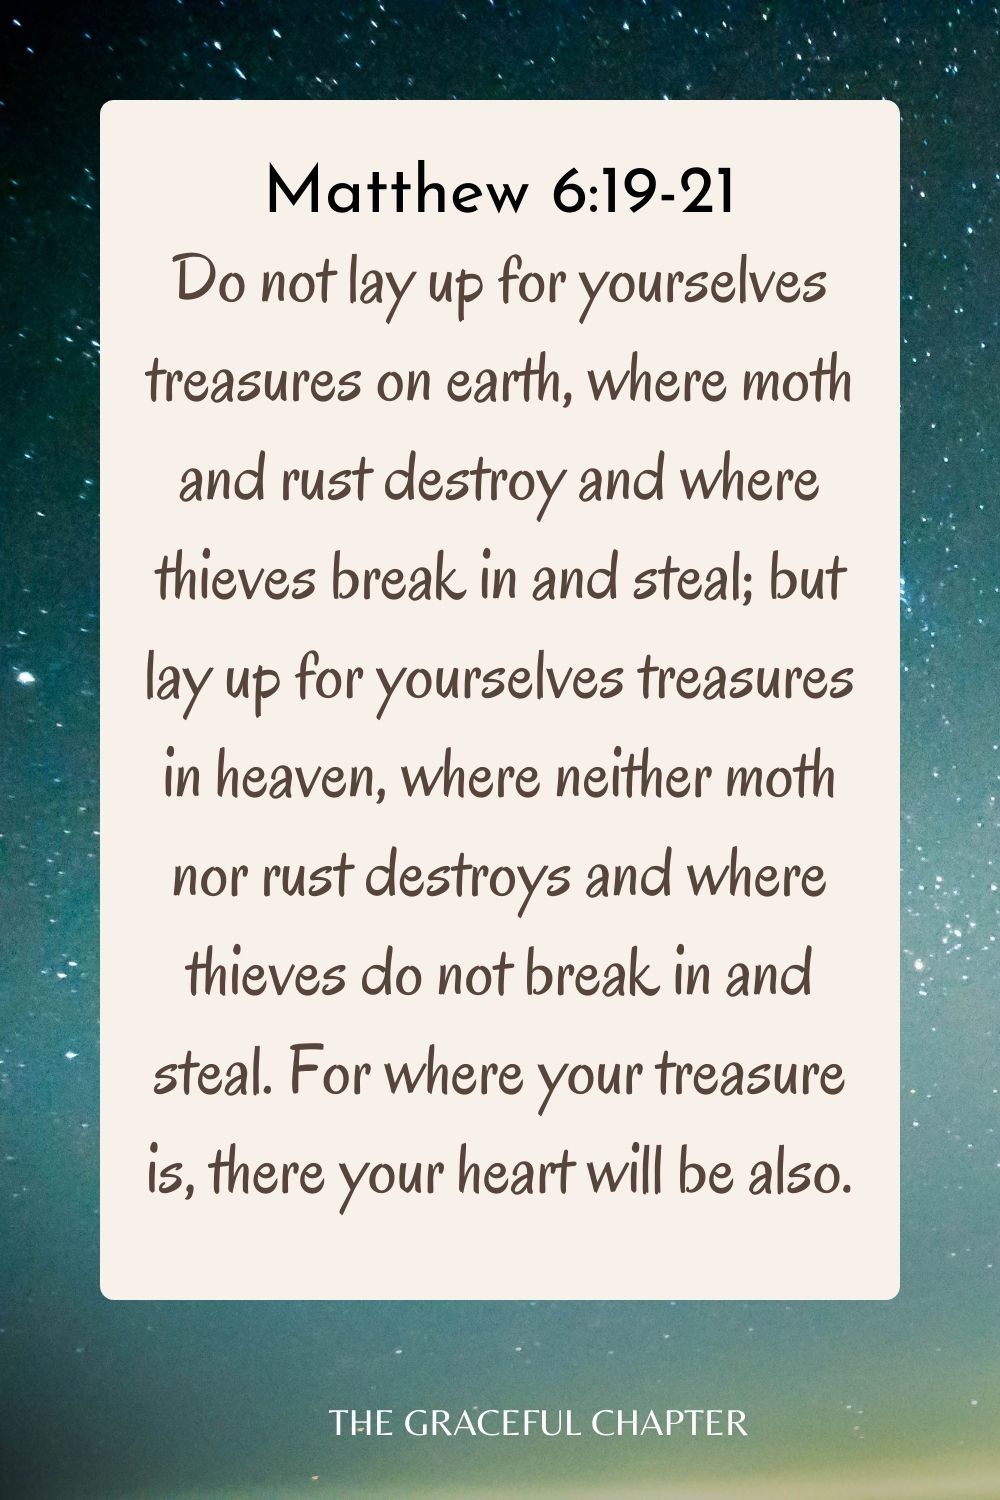 Do not lay up for yourselves treasures on earth, where moth and rust destroy and where thieves break in and steal; but lay up for yourselves treasures in heaven, where neither moth nor rust destroys and where thieves do not break in and steal. For where your treasure is, there your heart will be also. Matthew 6:19-21